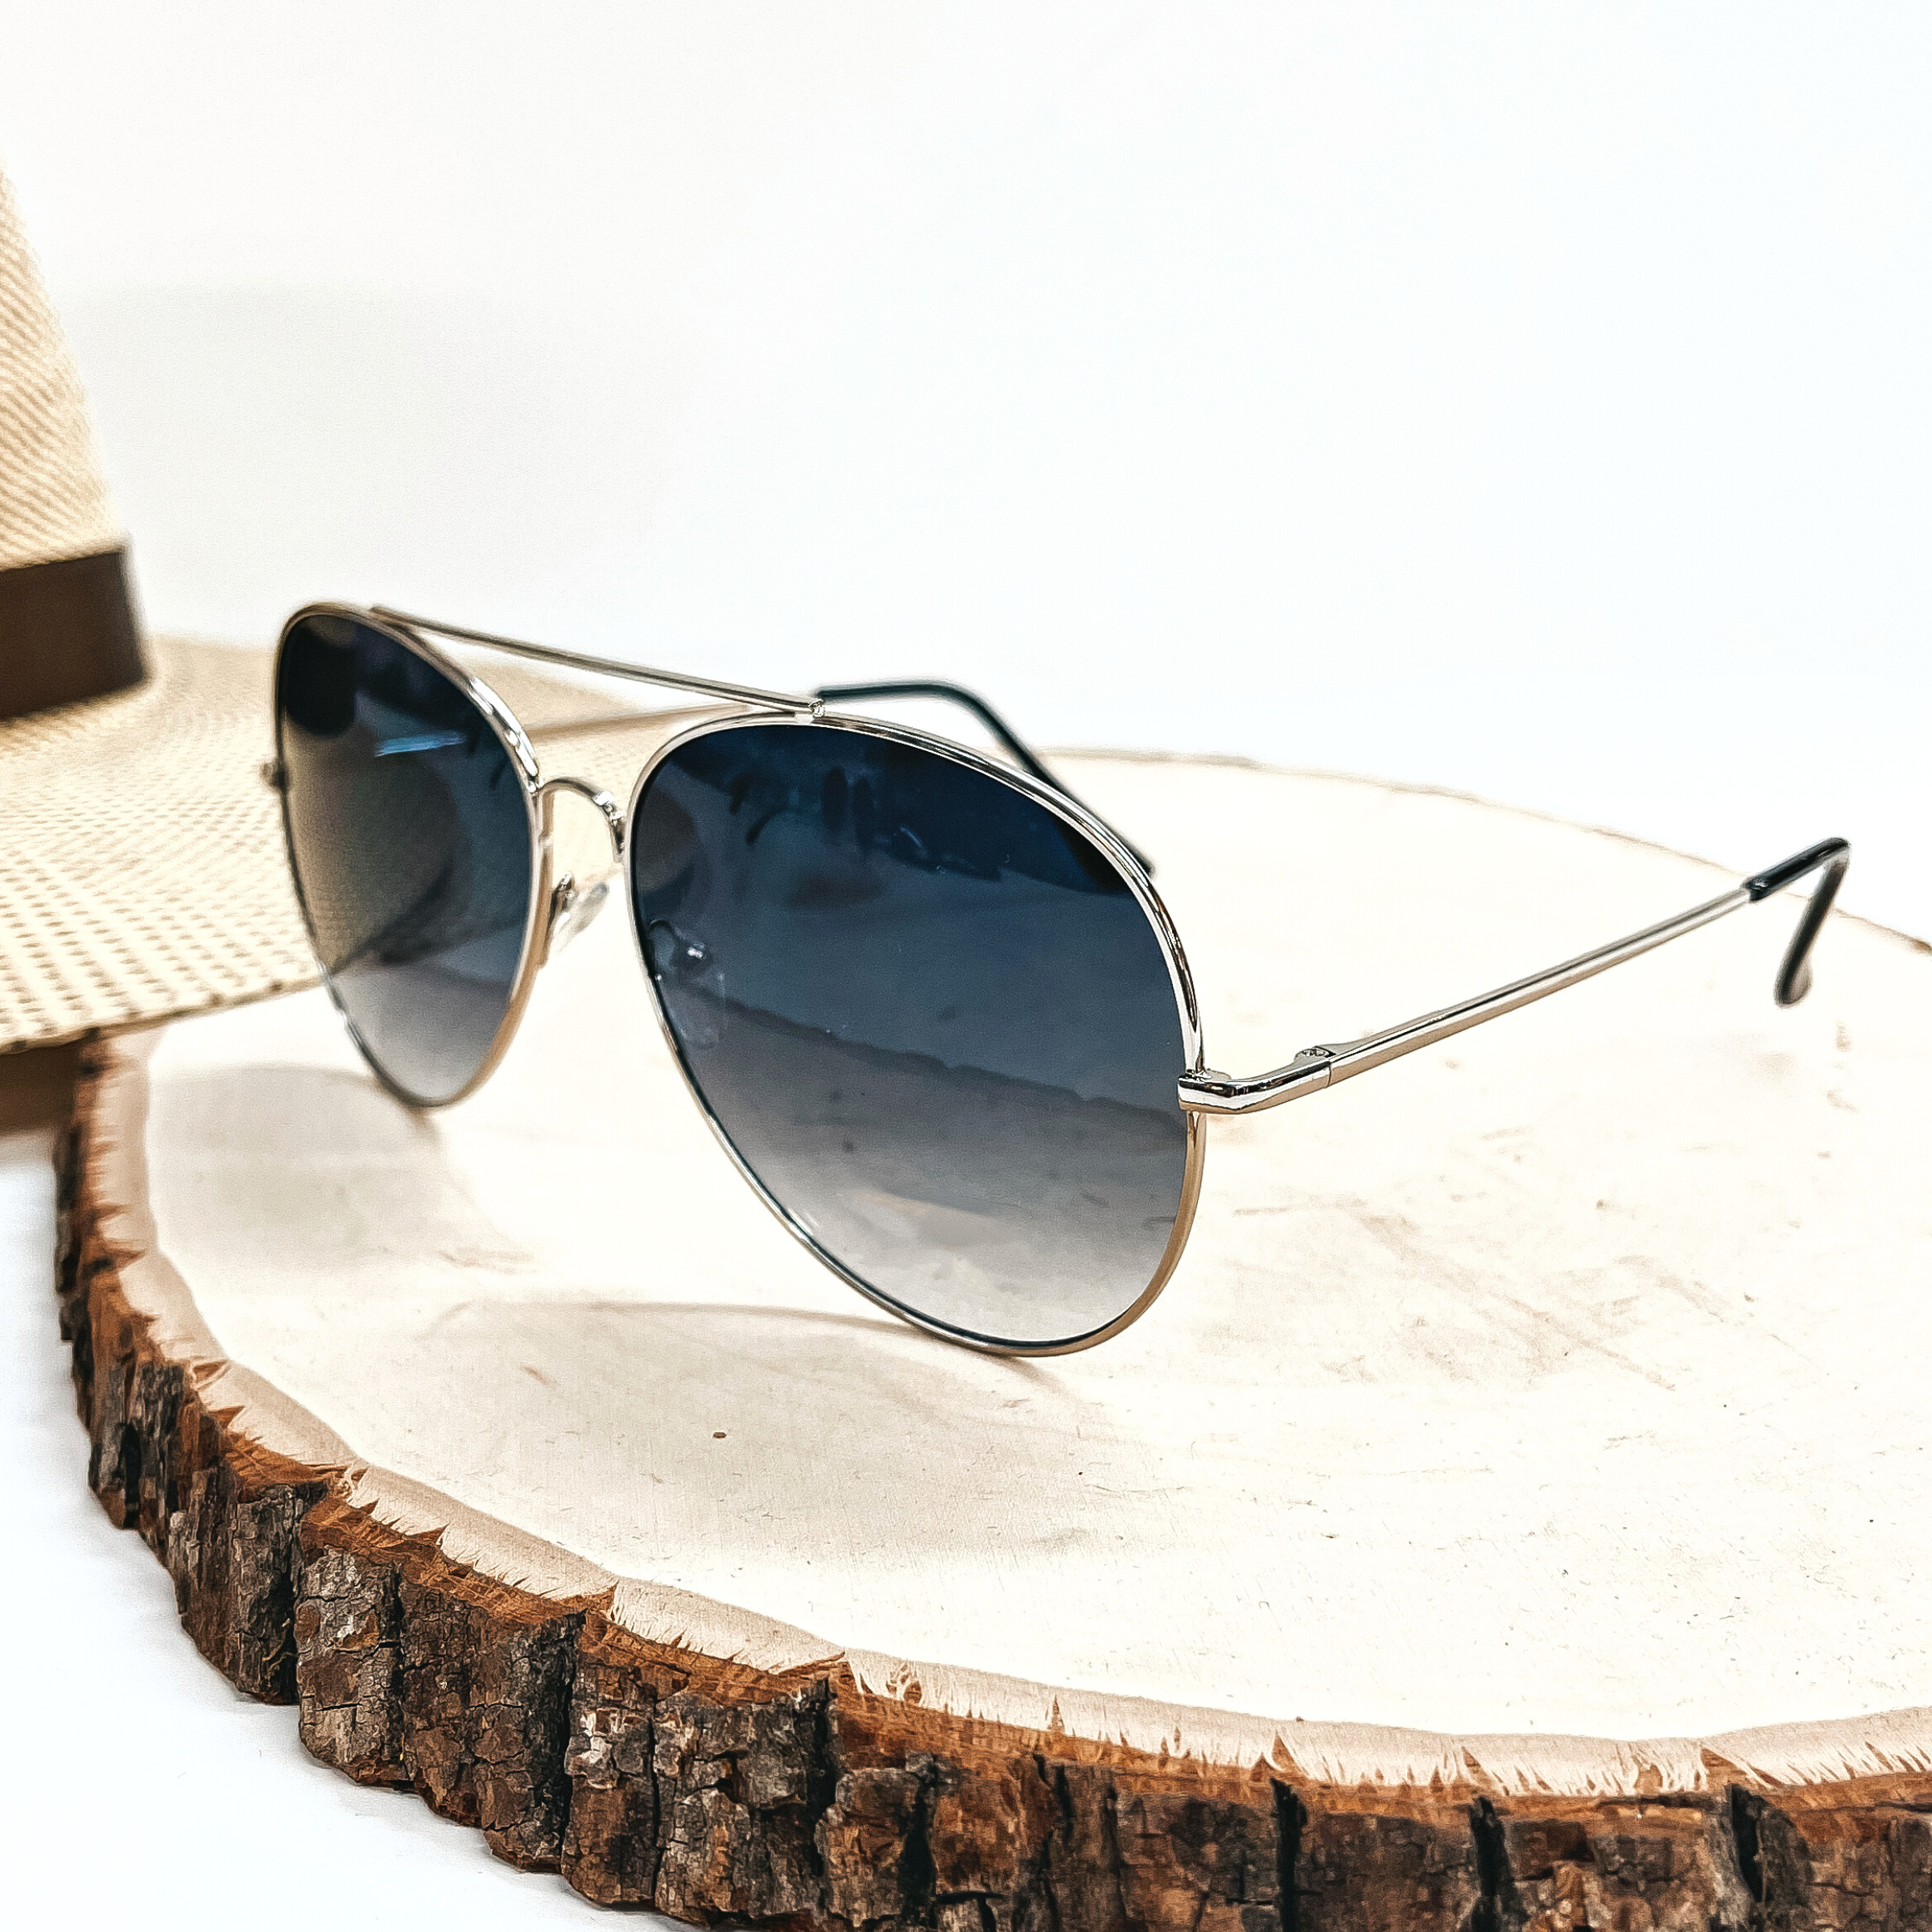 These are aviator style sunglasses with a dark grey/black lense and a silver  outline/frame. These sunglasses are taken on top of a slab of wood with a  straw hat in the back as decor.